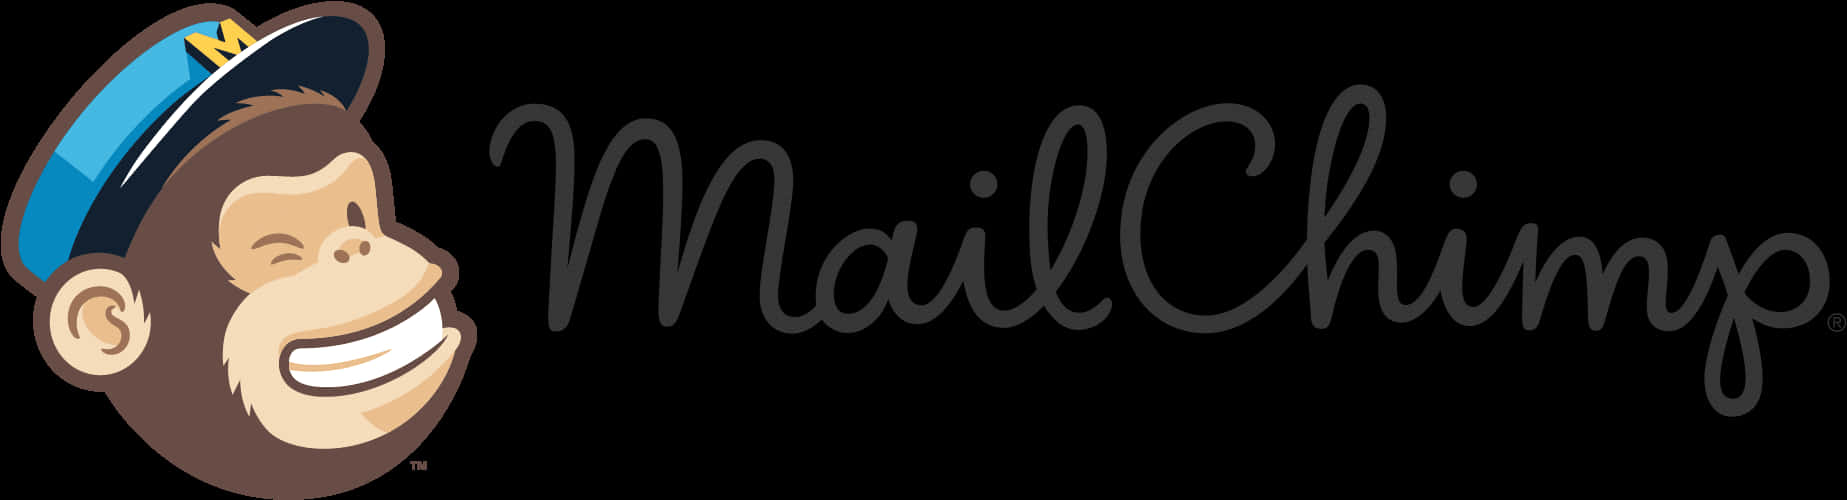 Mailchimp Logowith Mascot PNG image